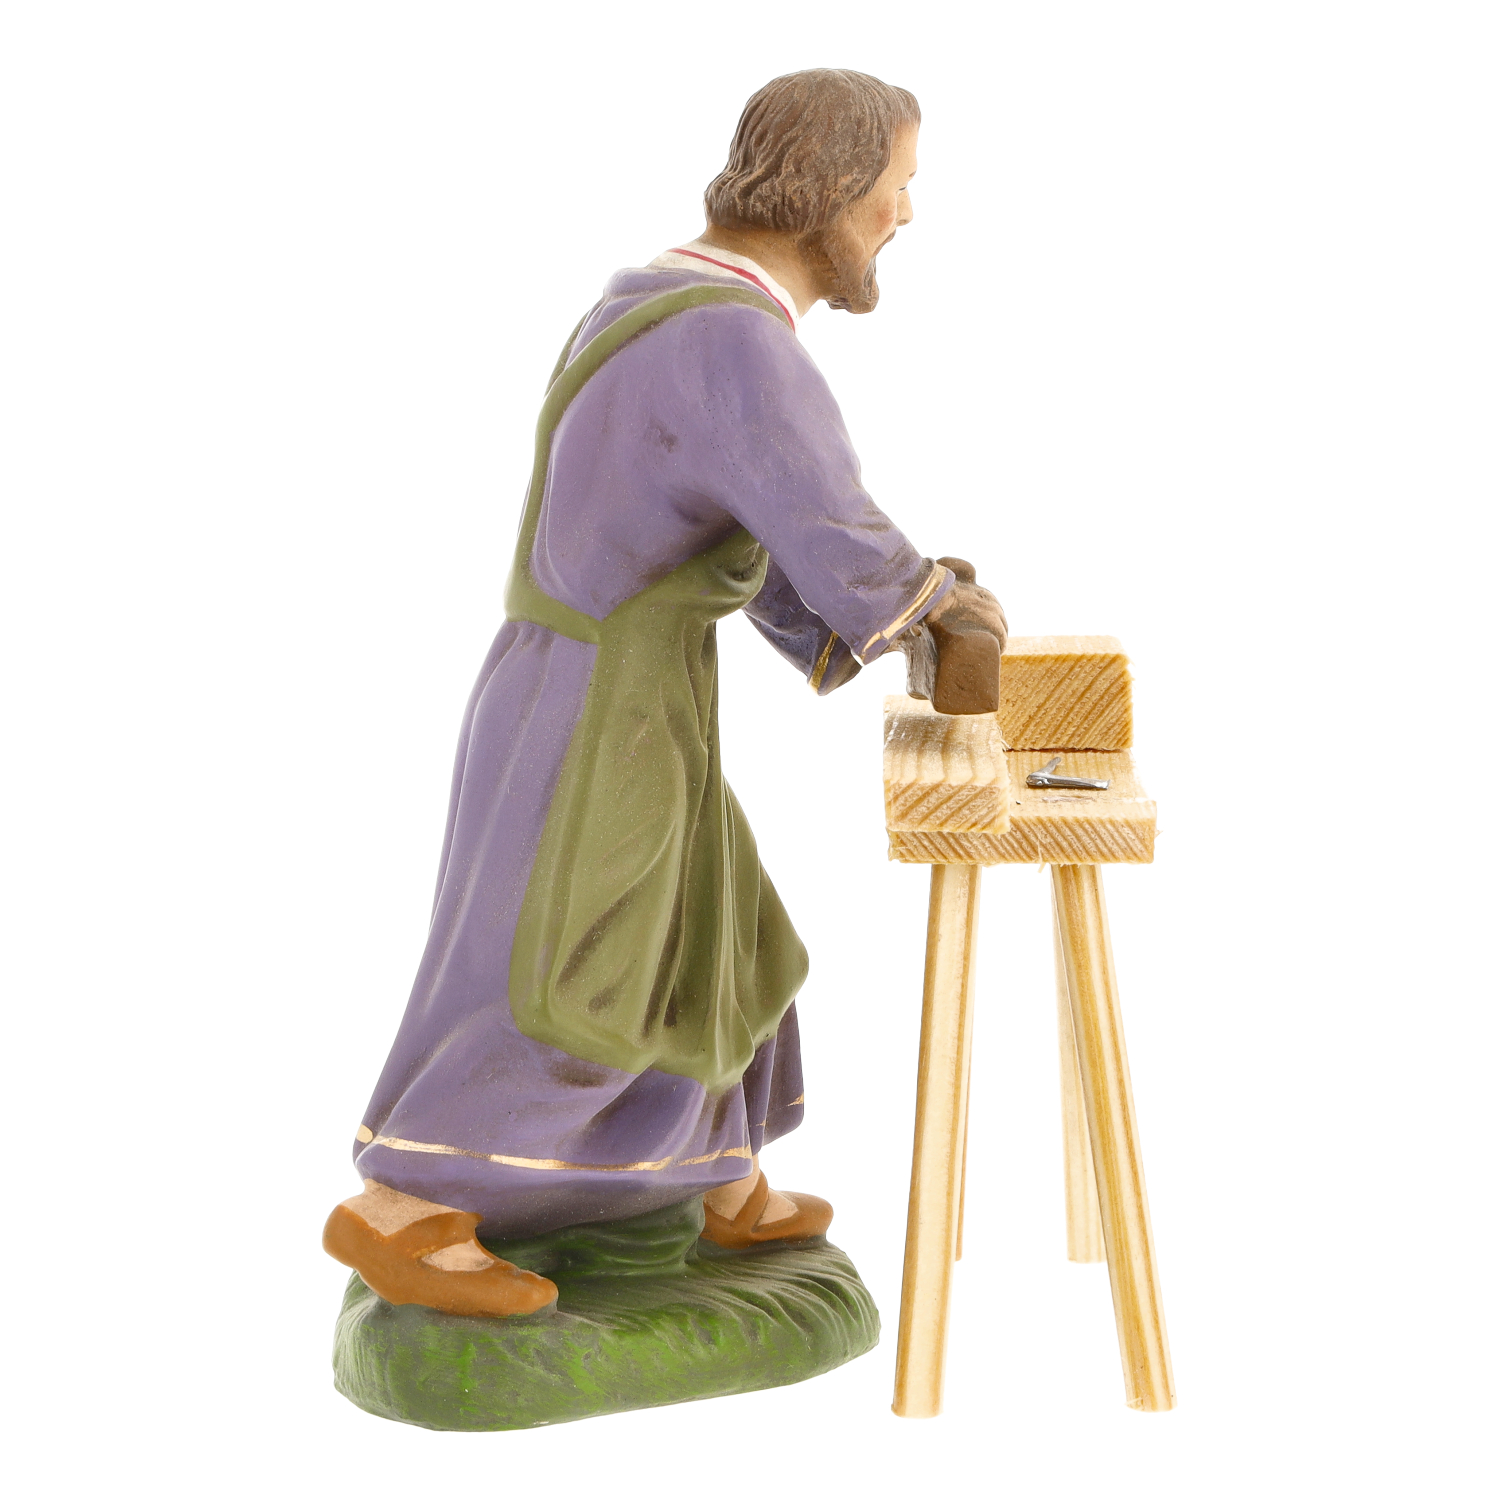 Holy Family at work, to 5.75 inch figure size